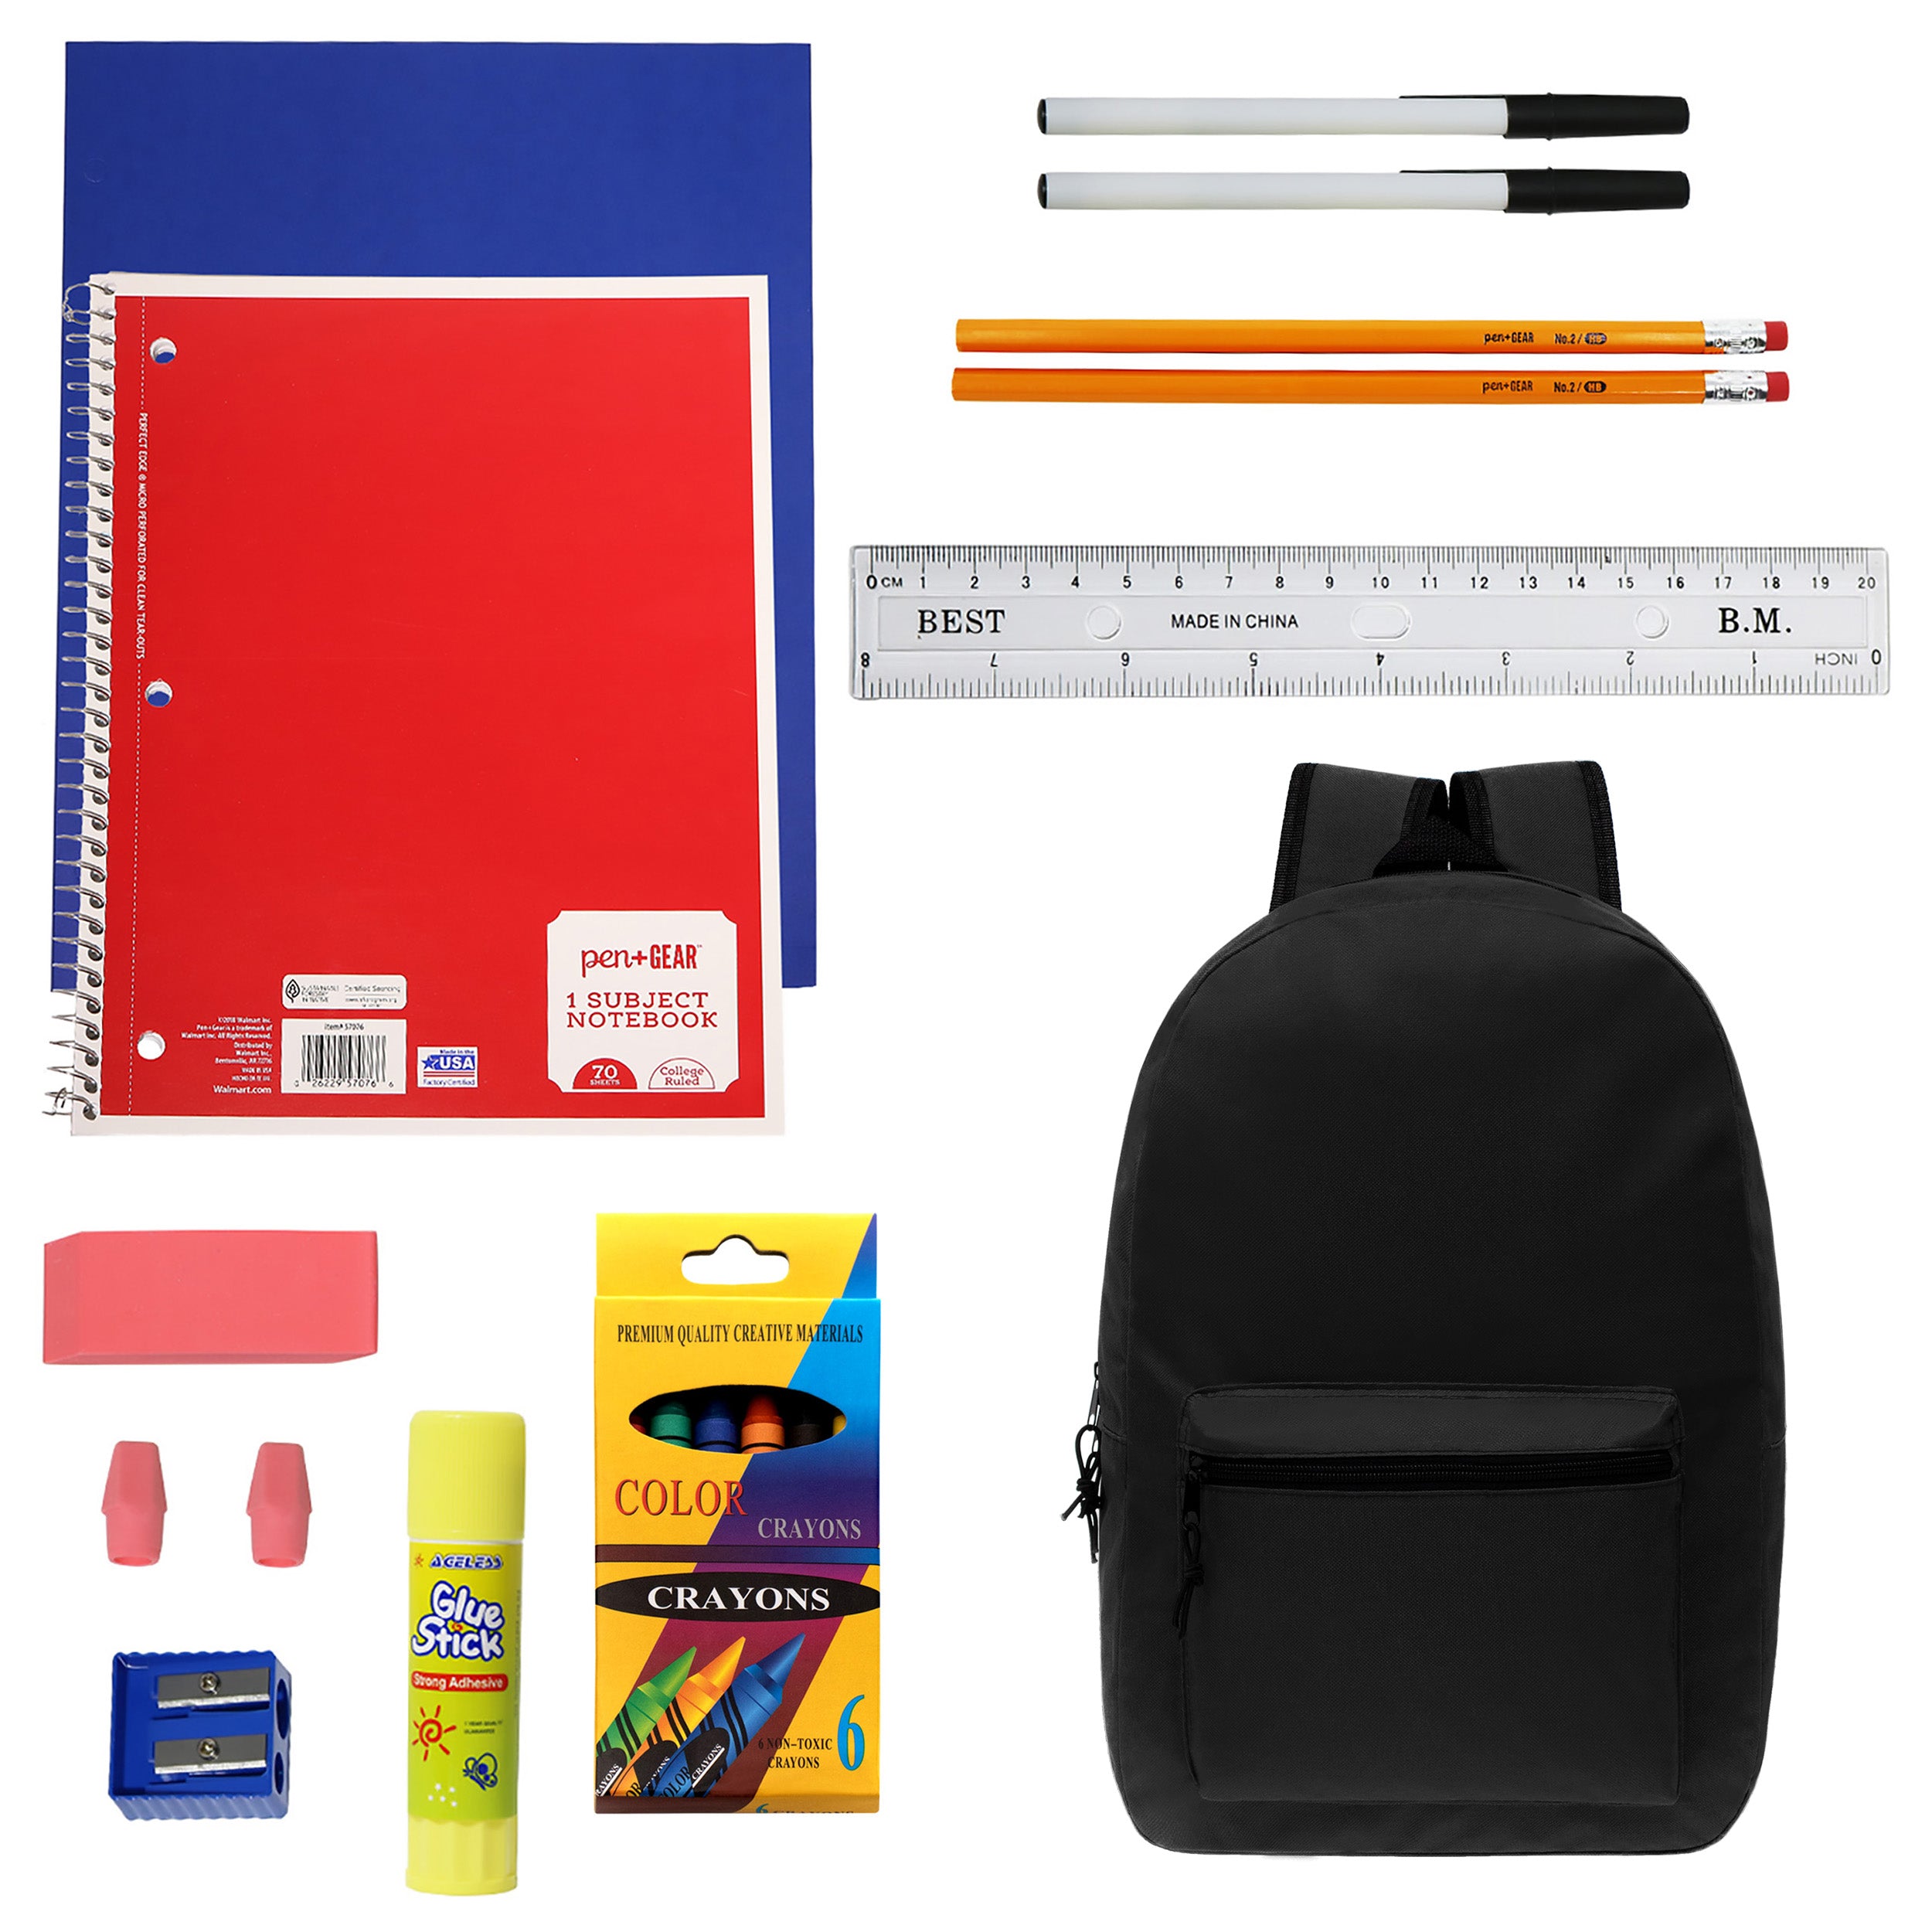 Wholesale School Supply Kits With Backpacks | Backpack USA